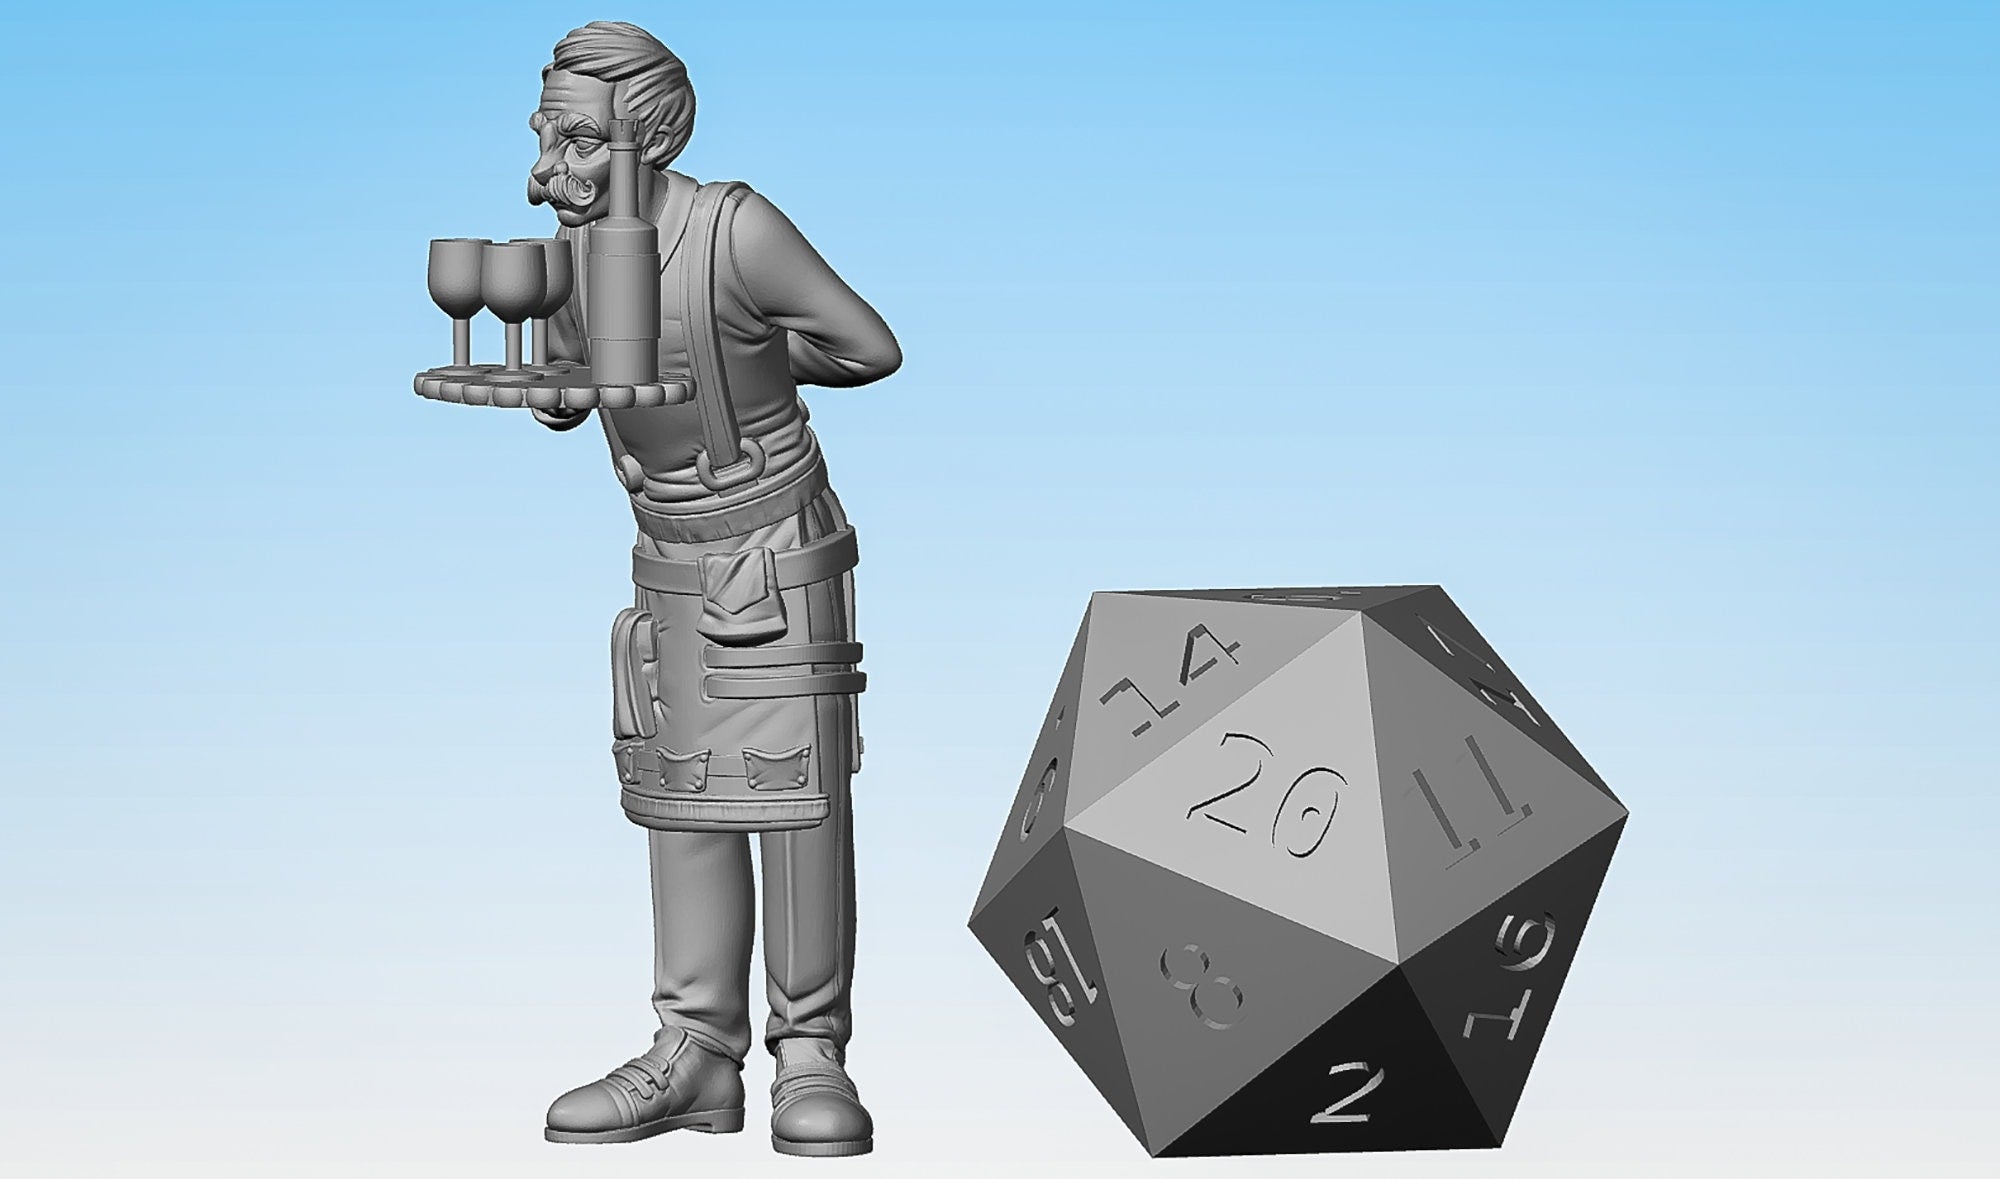 BUTLER "A" | Townsfolk Npc | Dungeons and Dragons | DnD | Pathfinder | Tabletop | RPG | Hero Size | 28 mm-Role Playing Miniatures